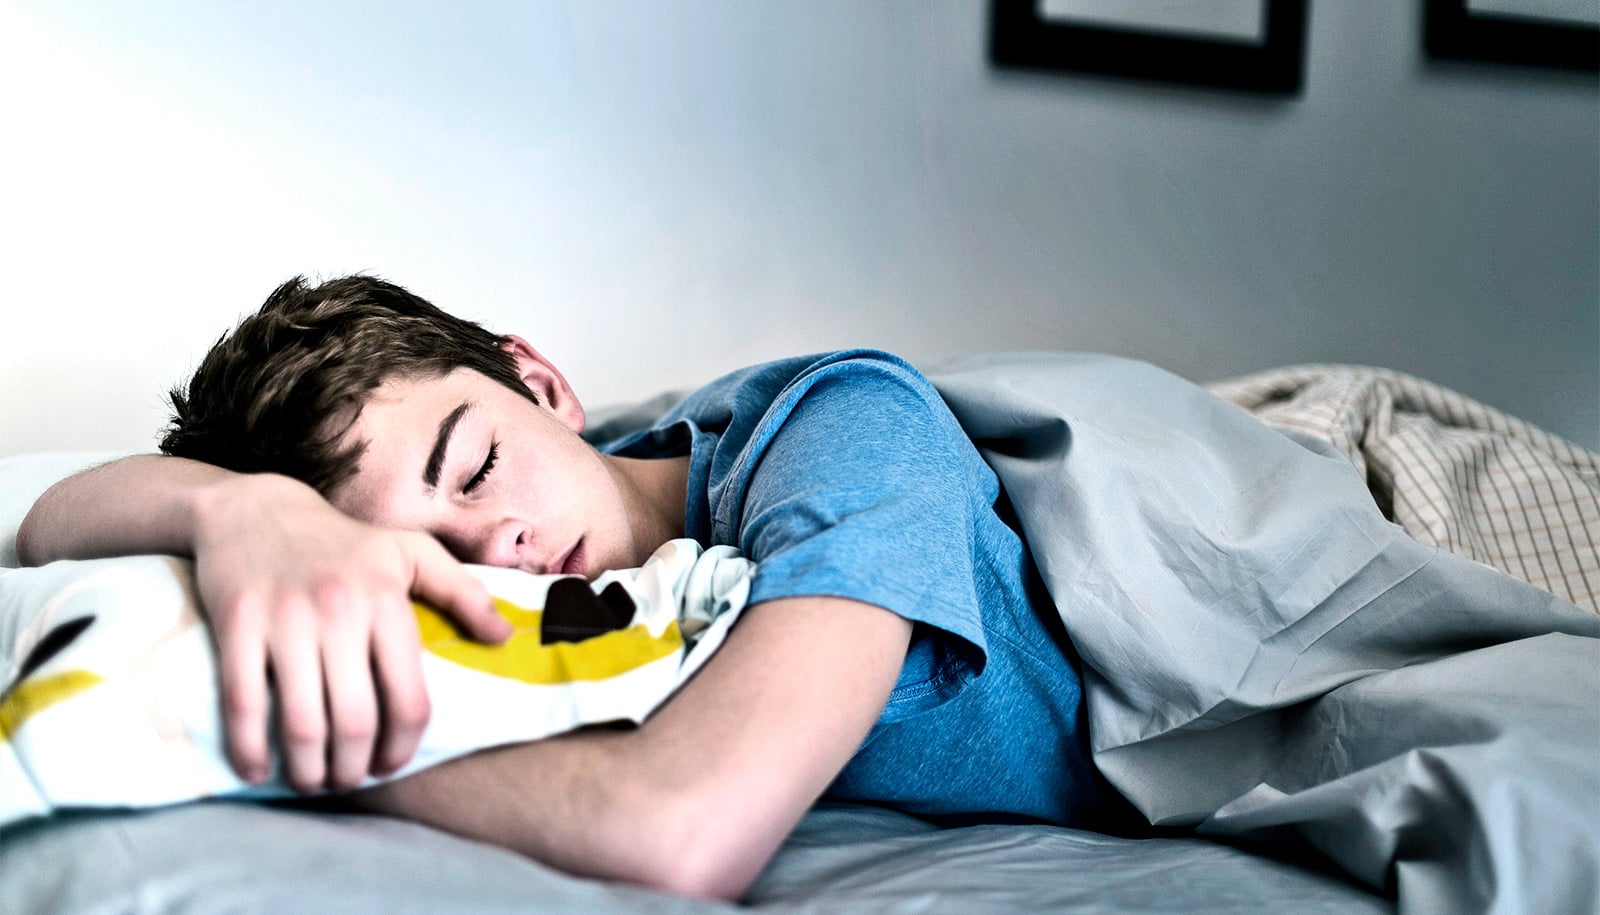 Study Finds American Teens Are Doing Better With More Sleep and Family Time Despite Stress of Coronavirus Pandemic